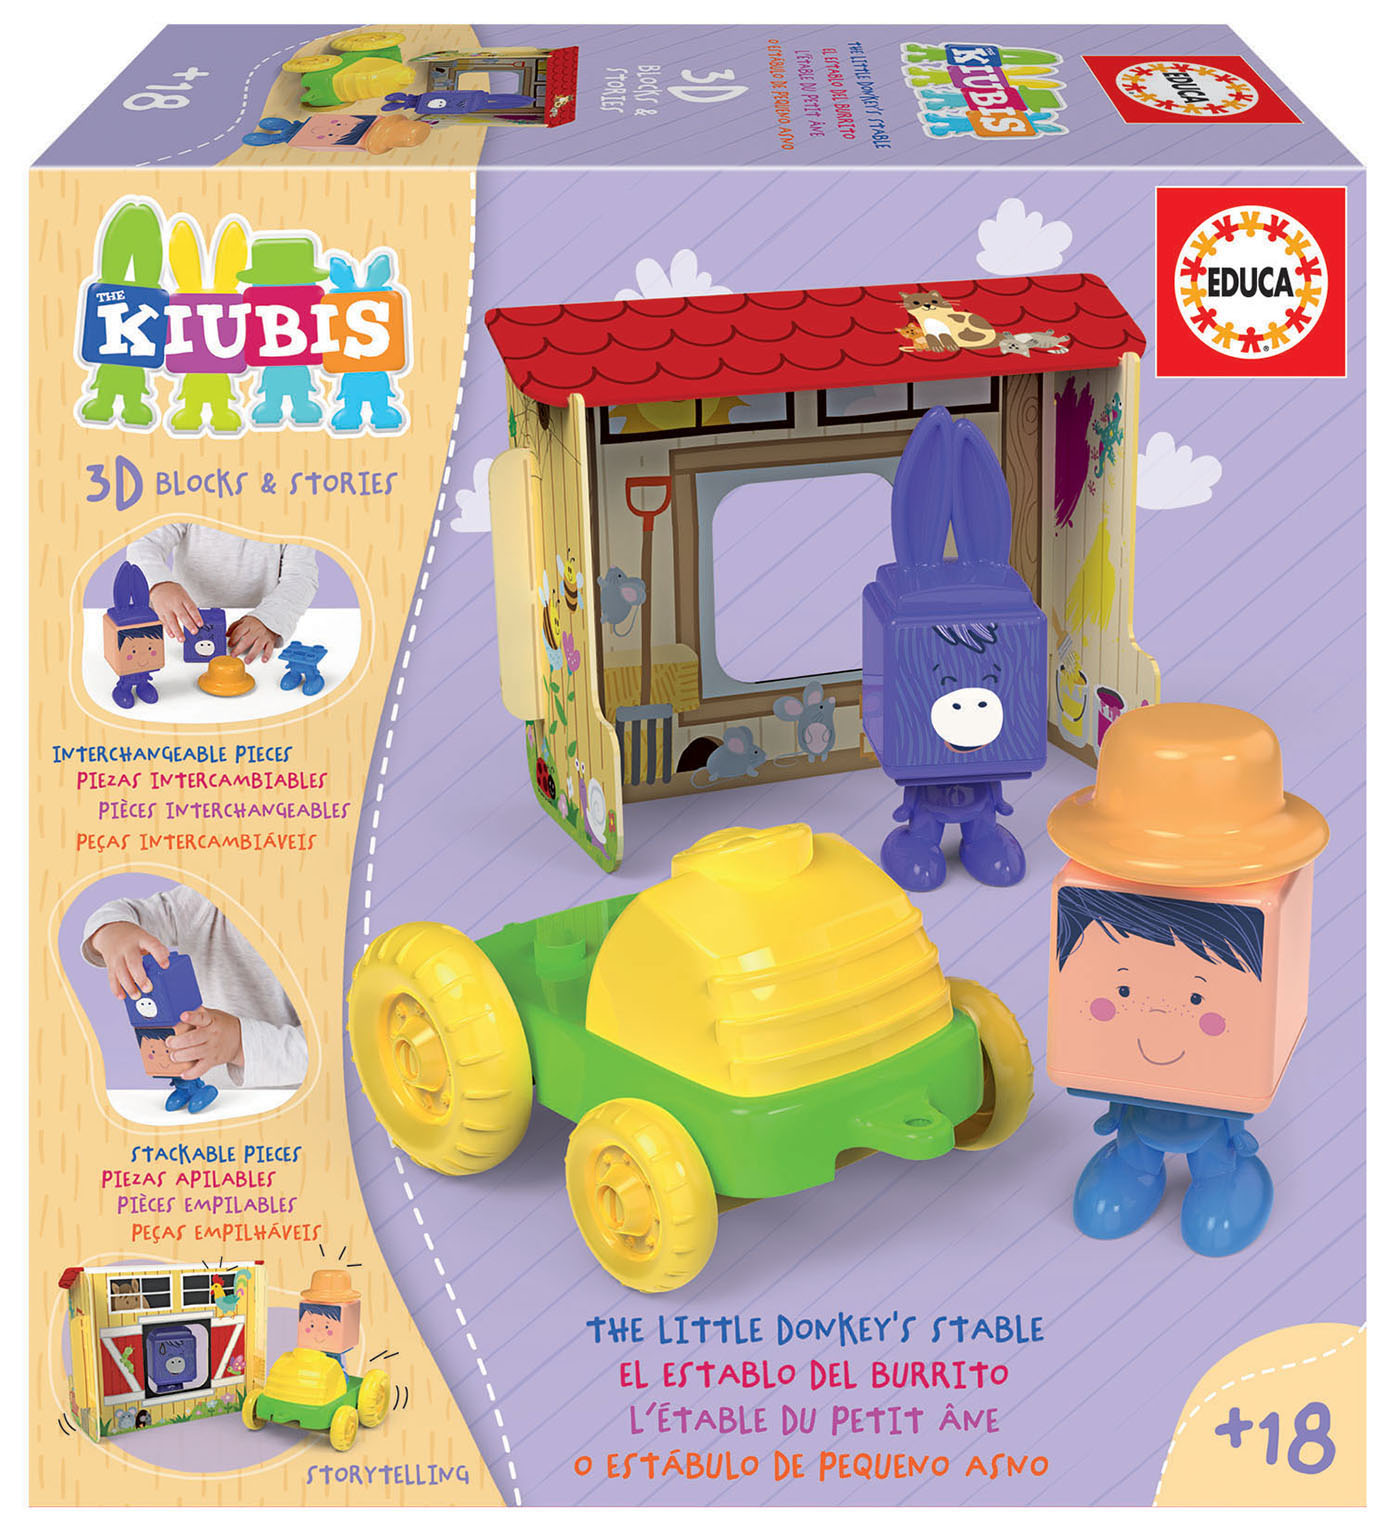 The Kiubis. The Donkey Stable